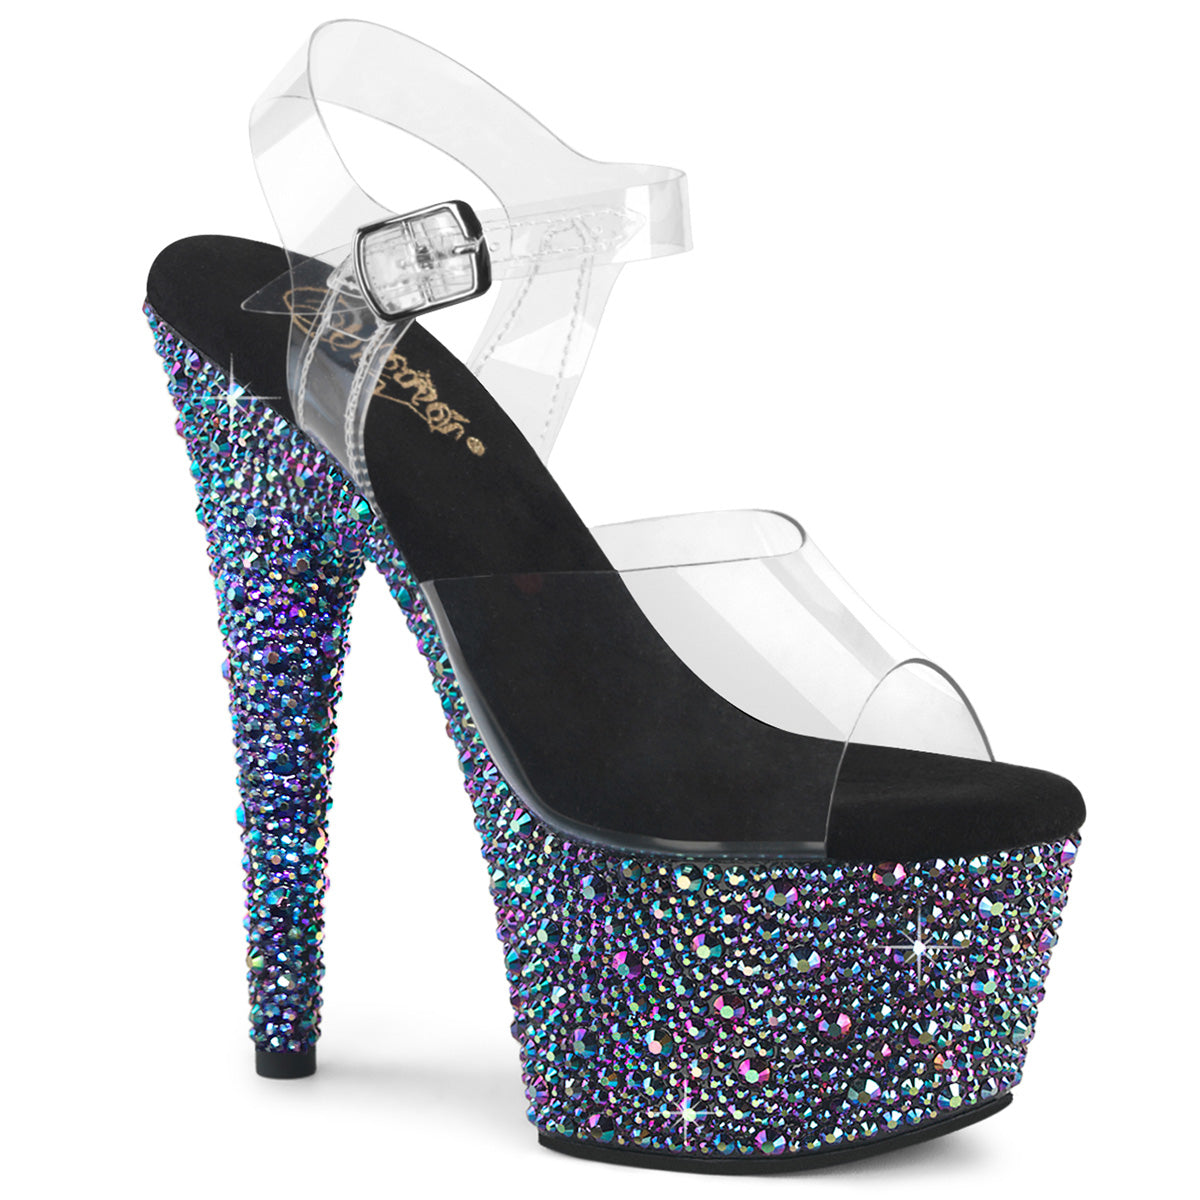 BEJEWELED-708MS Clear & Silver Ankle Peep Toe High Heel